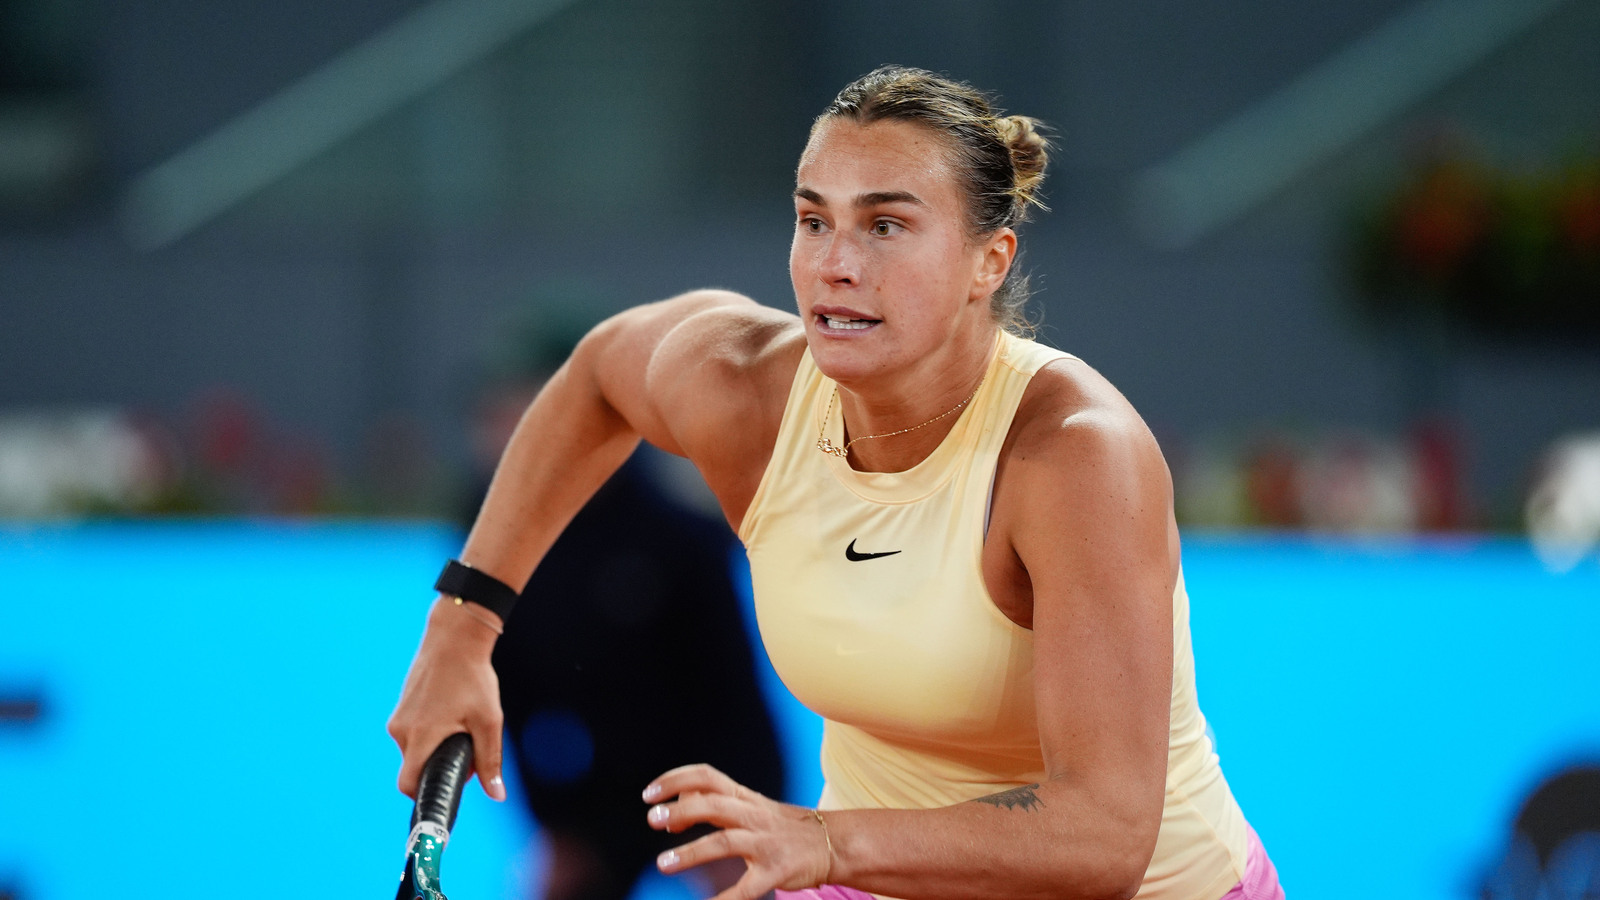 'She is allowed to lose sometimes' – Andy Roddick comforts Danielle Collins following disappointing loss to defending champion Aryna Sabalenka in Madrid